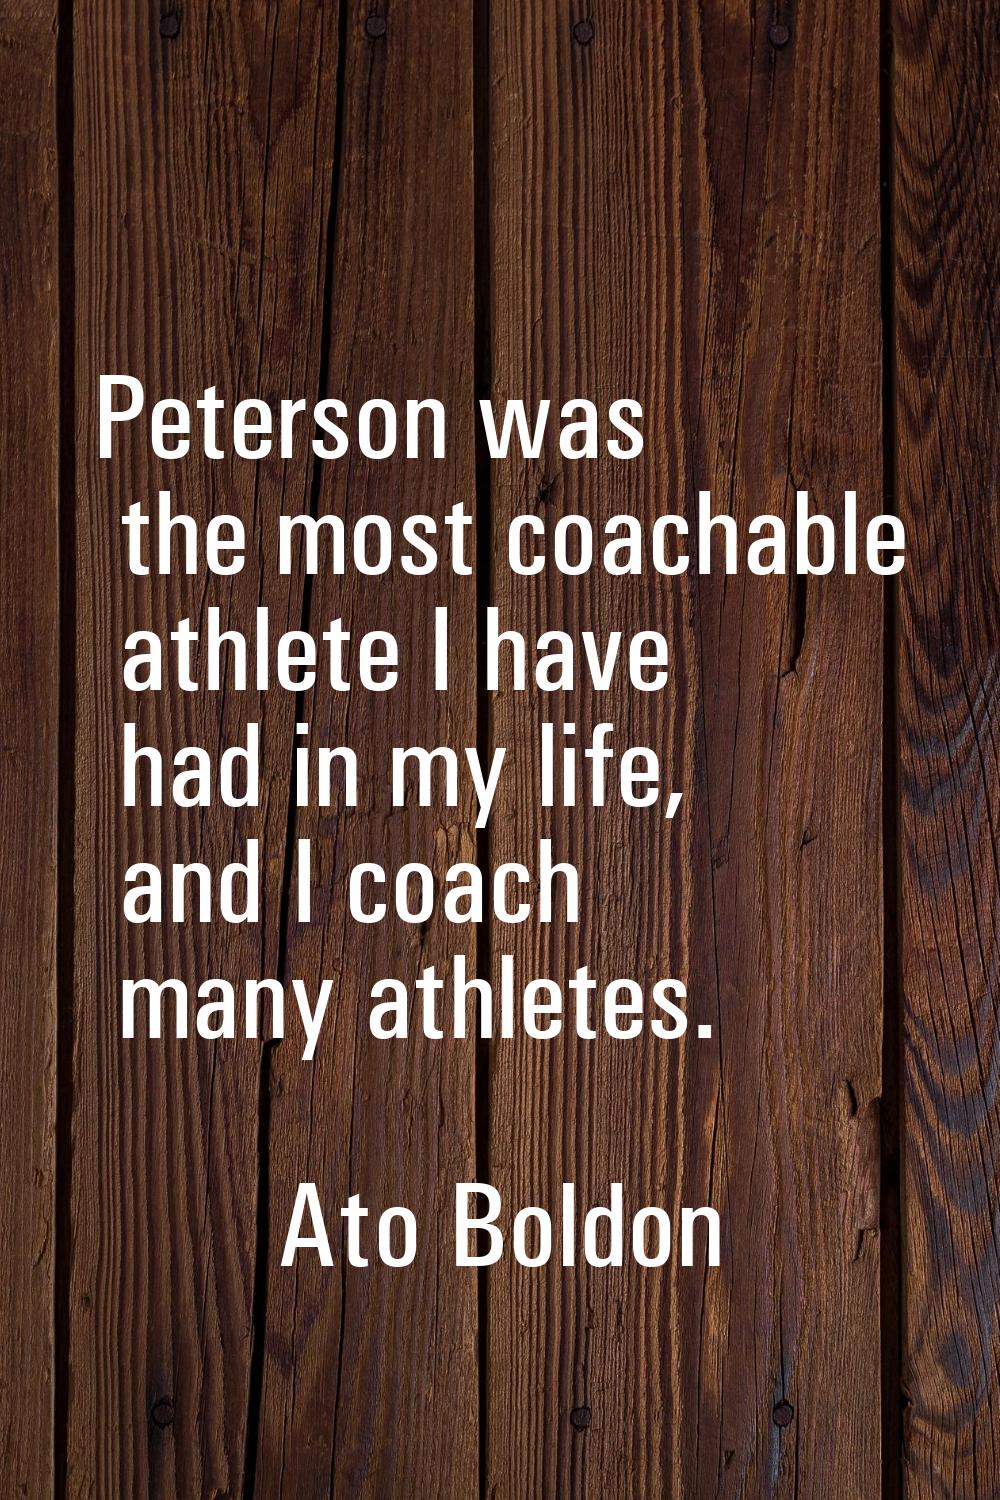 Peterson was the most coachable athlete I have had in my life, and I coach many athletes.